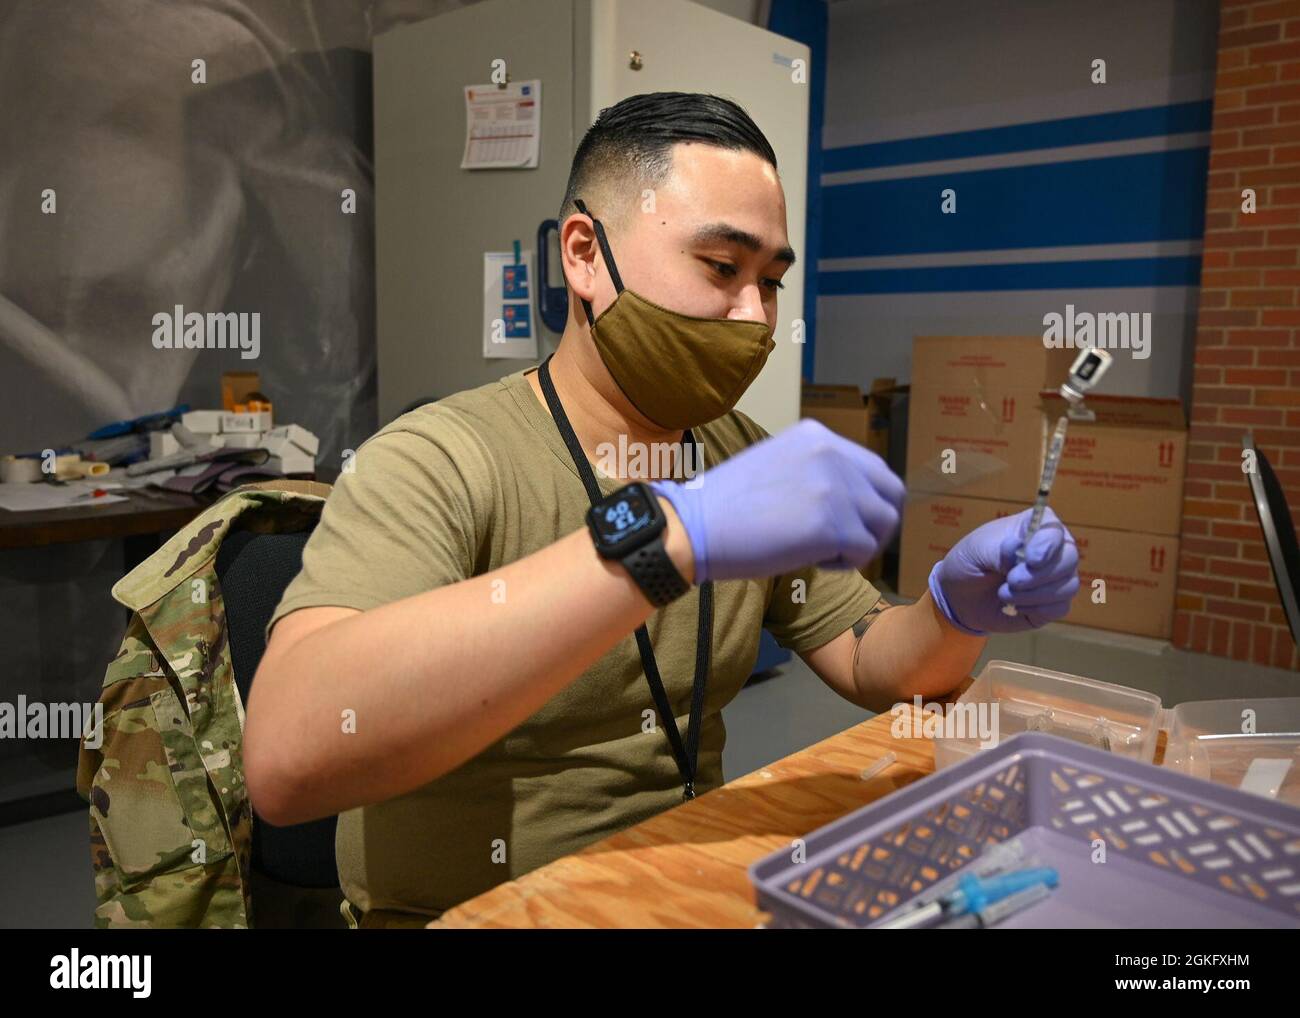 U.S. Air Force Senior Airman Vincent Uy, a Los Banos, California native and laboratory technician with the 88th Diagnostics Squadron, 88th Air Base Wing stationed at Wright-Patterson Air Force Base, removes air bubbles from a vaccine syringe to ensure a correct dose at the state-led, federally-supported Ford Field COVID-19 Community Vaccination Center in Detroit, April 12, 2021. Uy is part of a group of Airmen assigned to 1st Detachment, 64th Air Expeditionary Group that are assisting with the vaccination efforts. Uy’s main responsibility is supporting the local community members by preparing Stock Photo